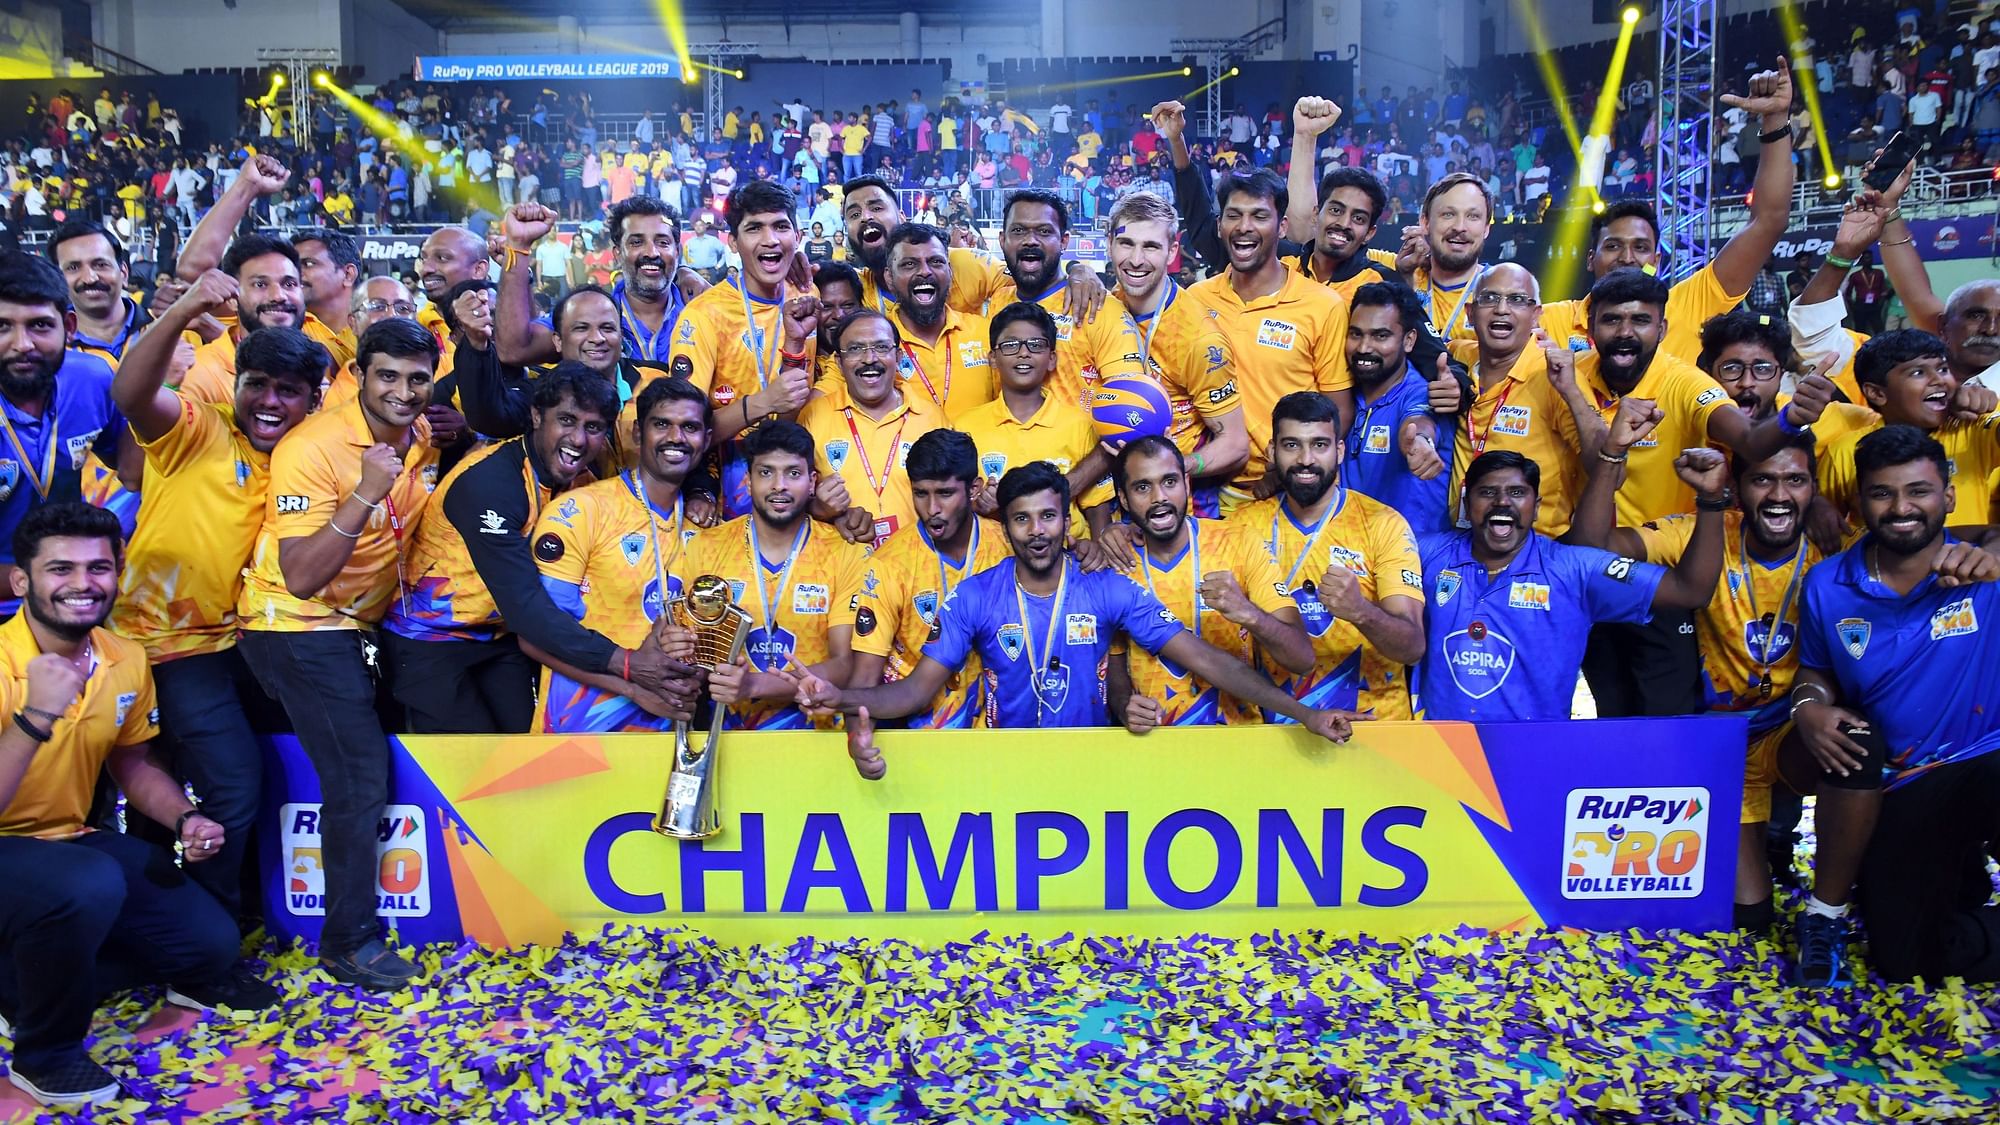 Chennai Spartans defeated Calicut Heroes 3-0 to win the the inaugural edition of the Pro Volleyball League.